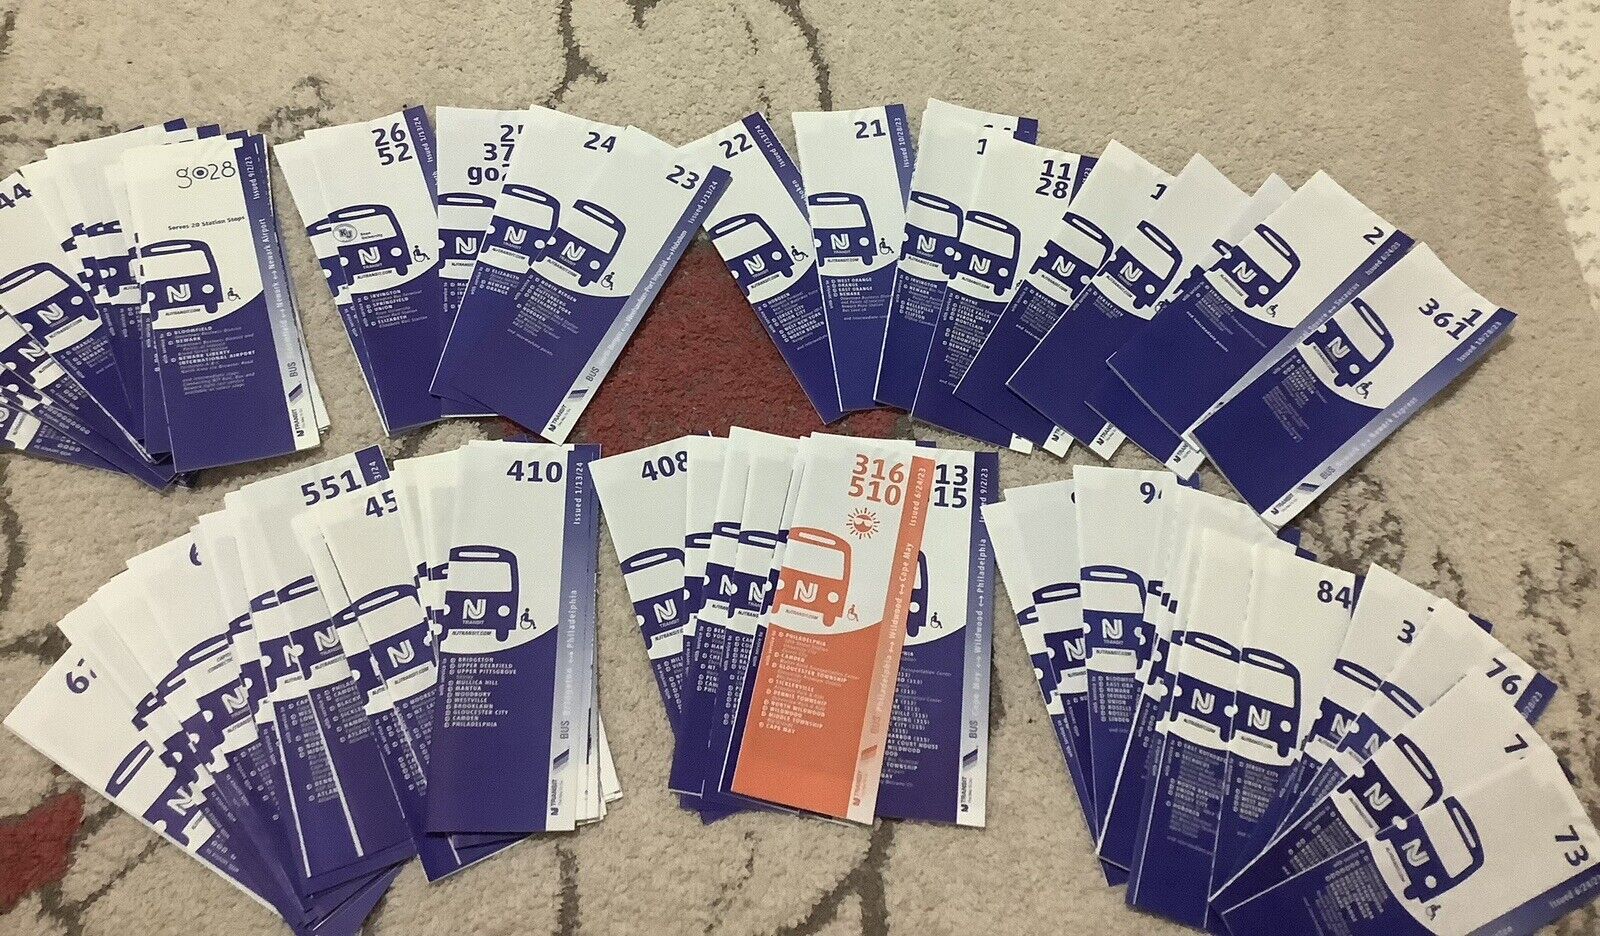 NEW Nj Transit Timetable Schedule Map New Jersey Transit Bus Lot Of 83